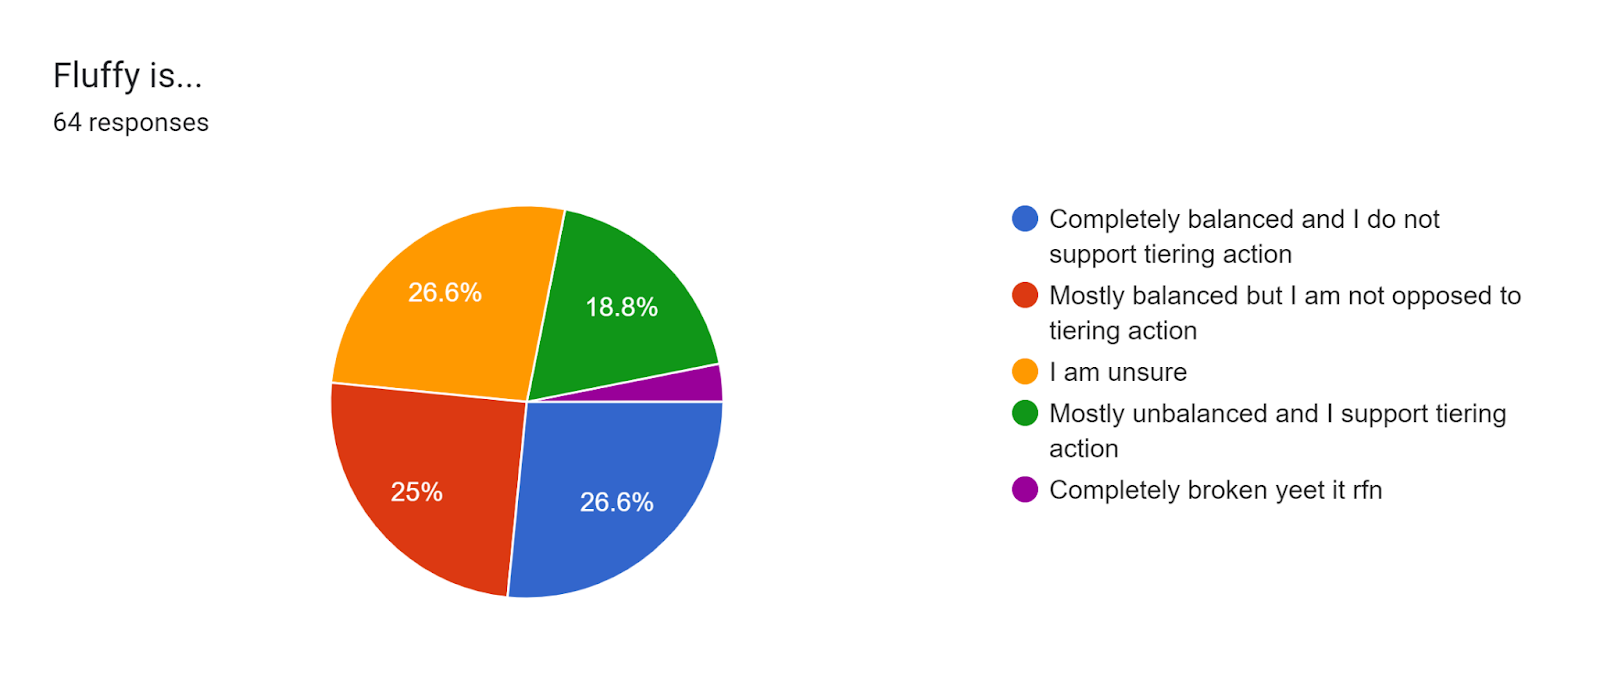 Forms response chart. Question title: Fluffy is.... Number of responses: 64 responses.